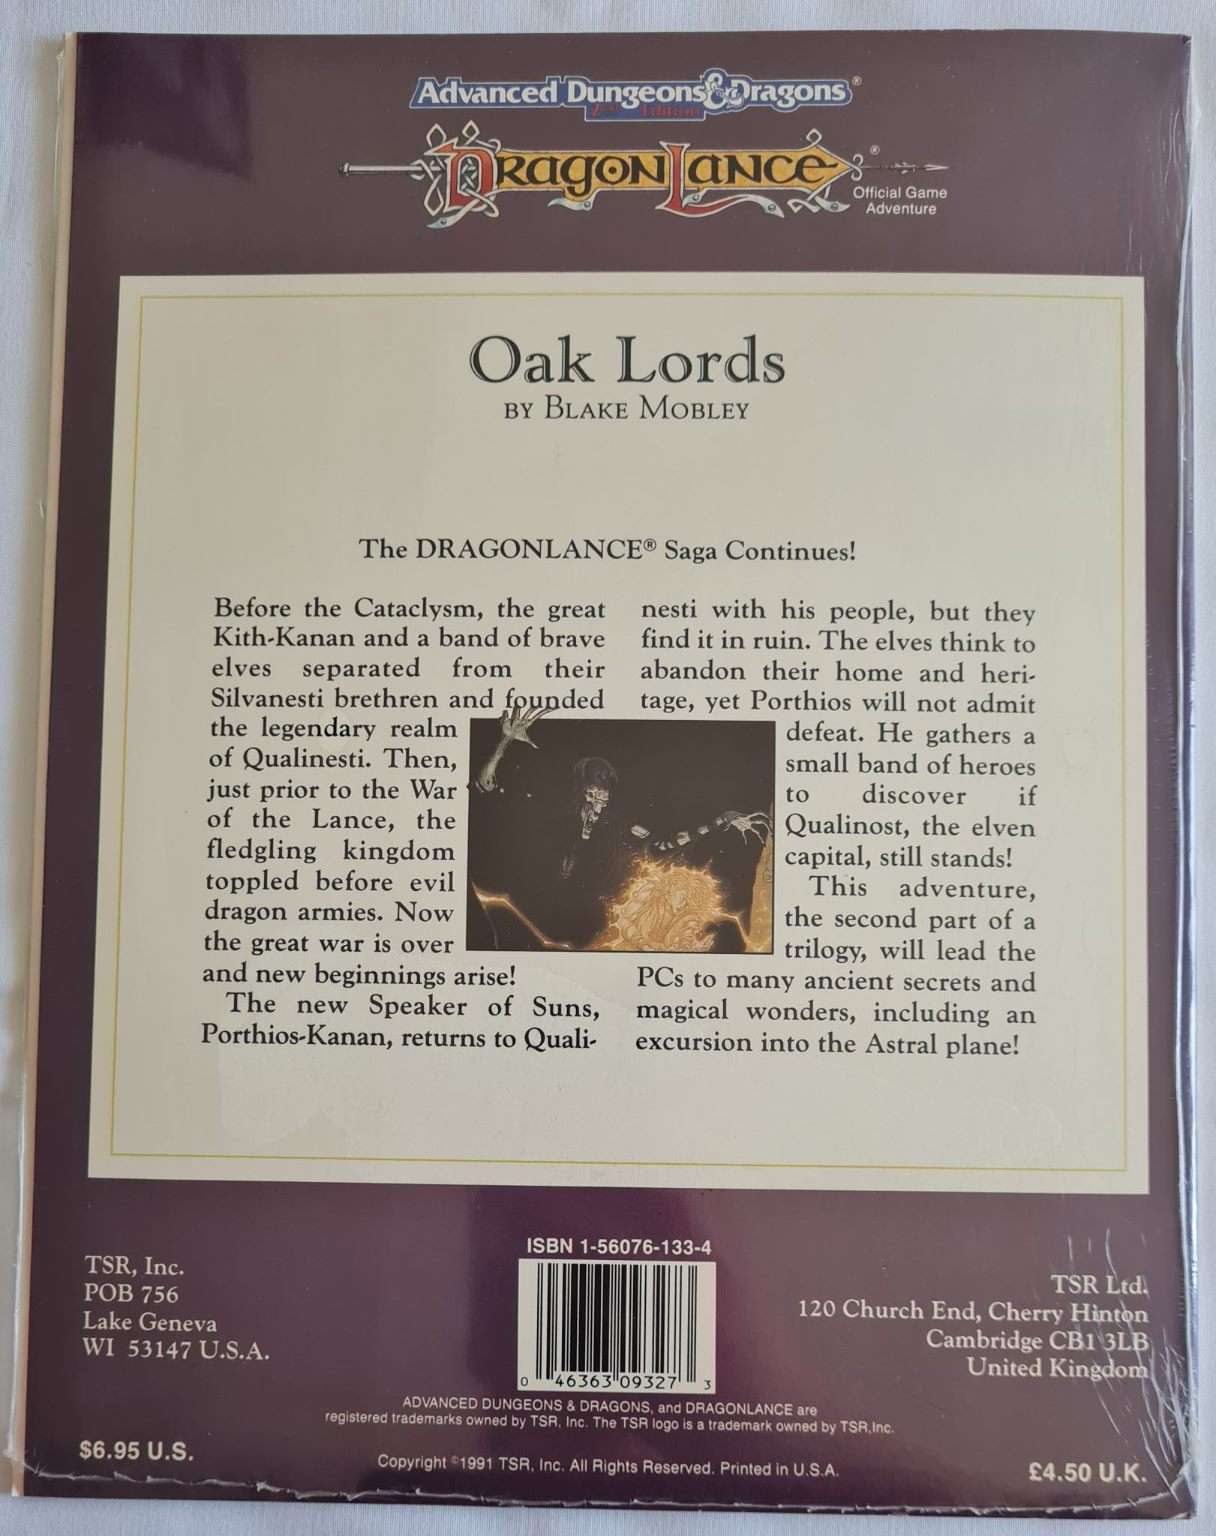 Advanced Dungeons and Dragons - Dragonlance - Oak Lords (DLS3 9327) Sealed Default Title